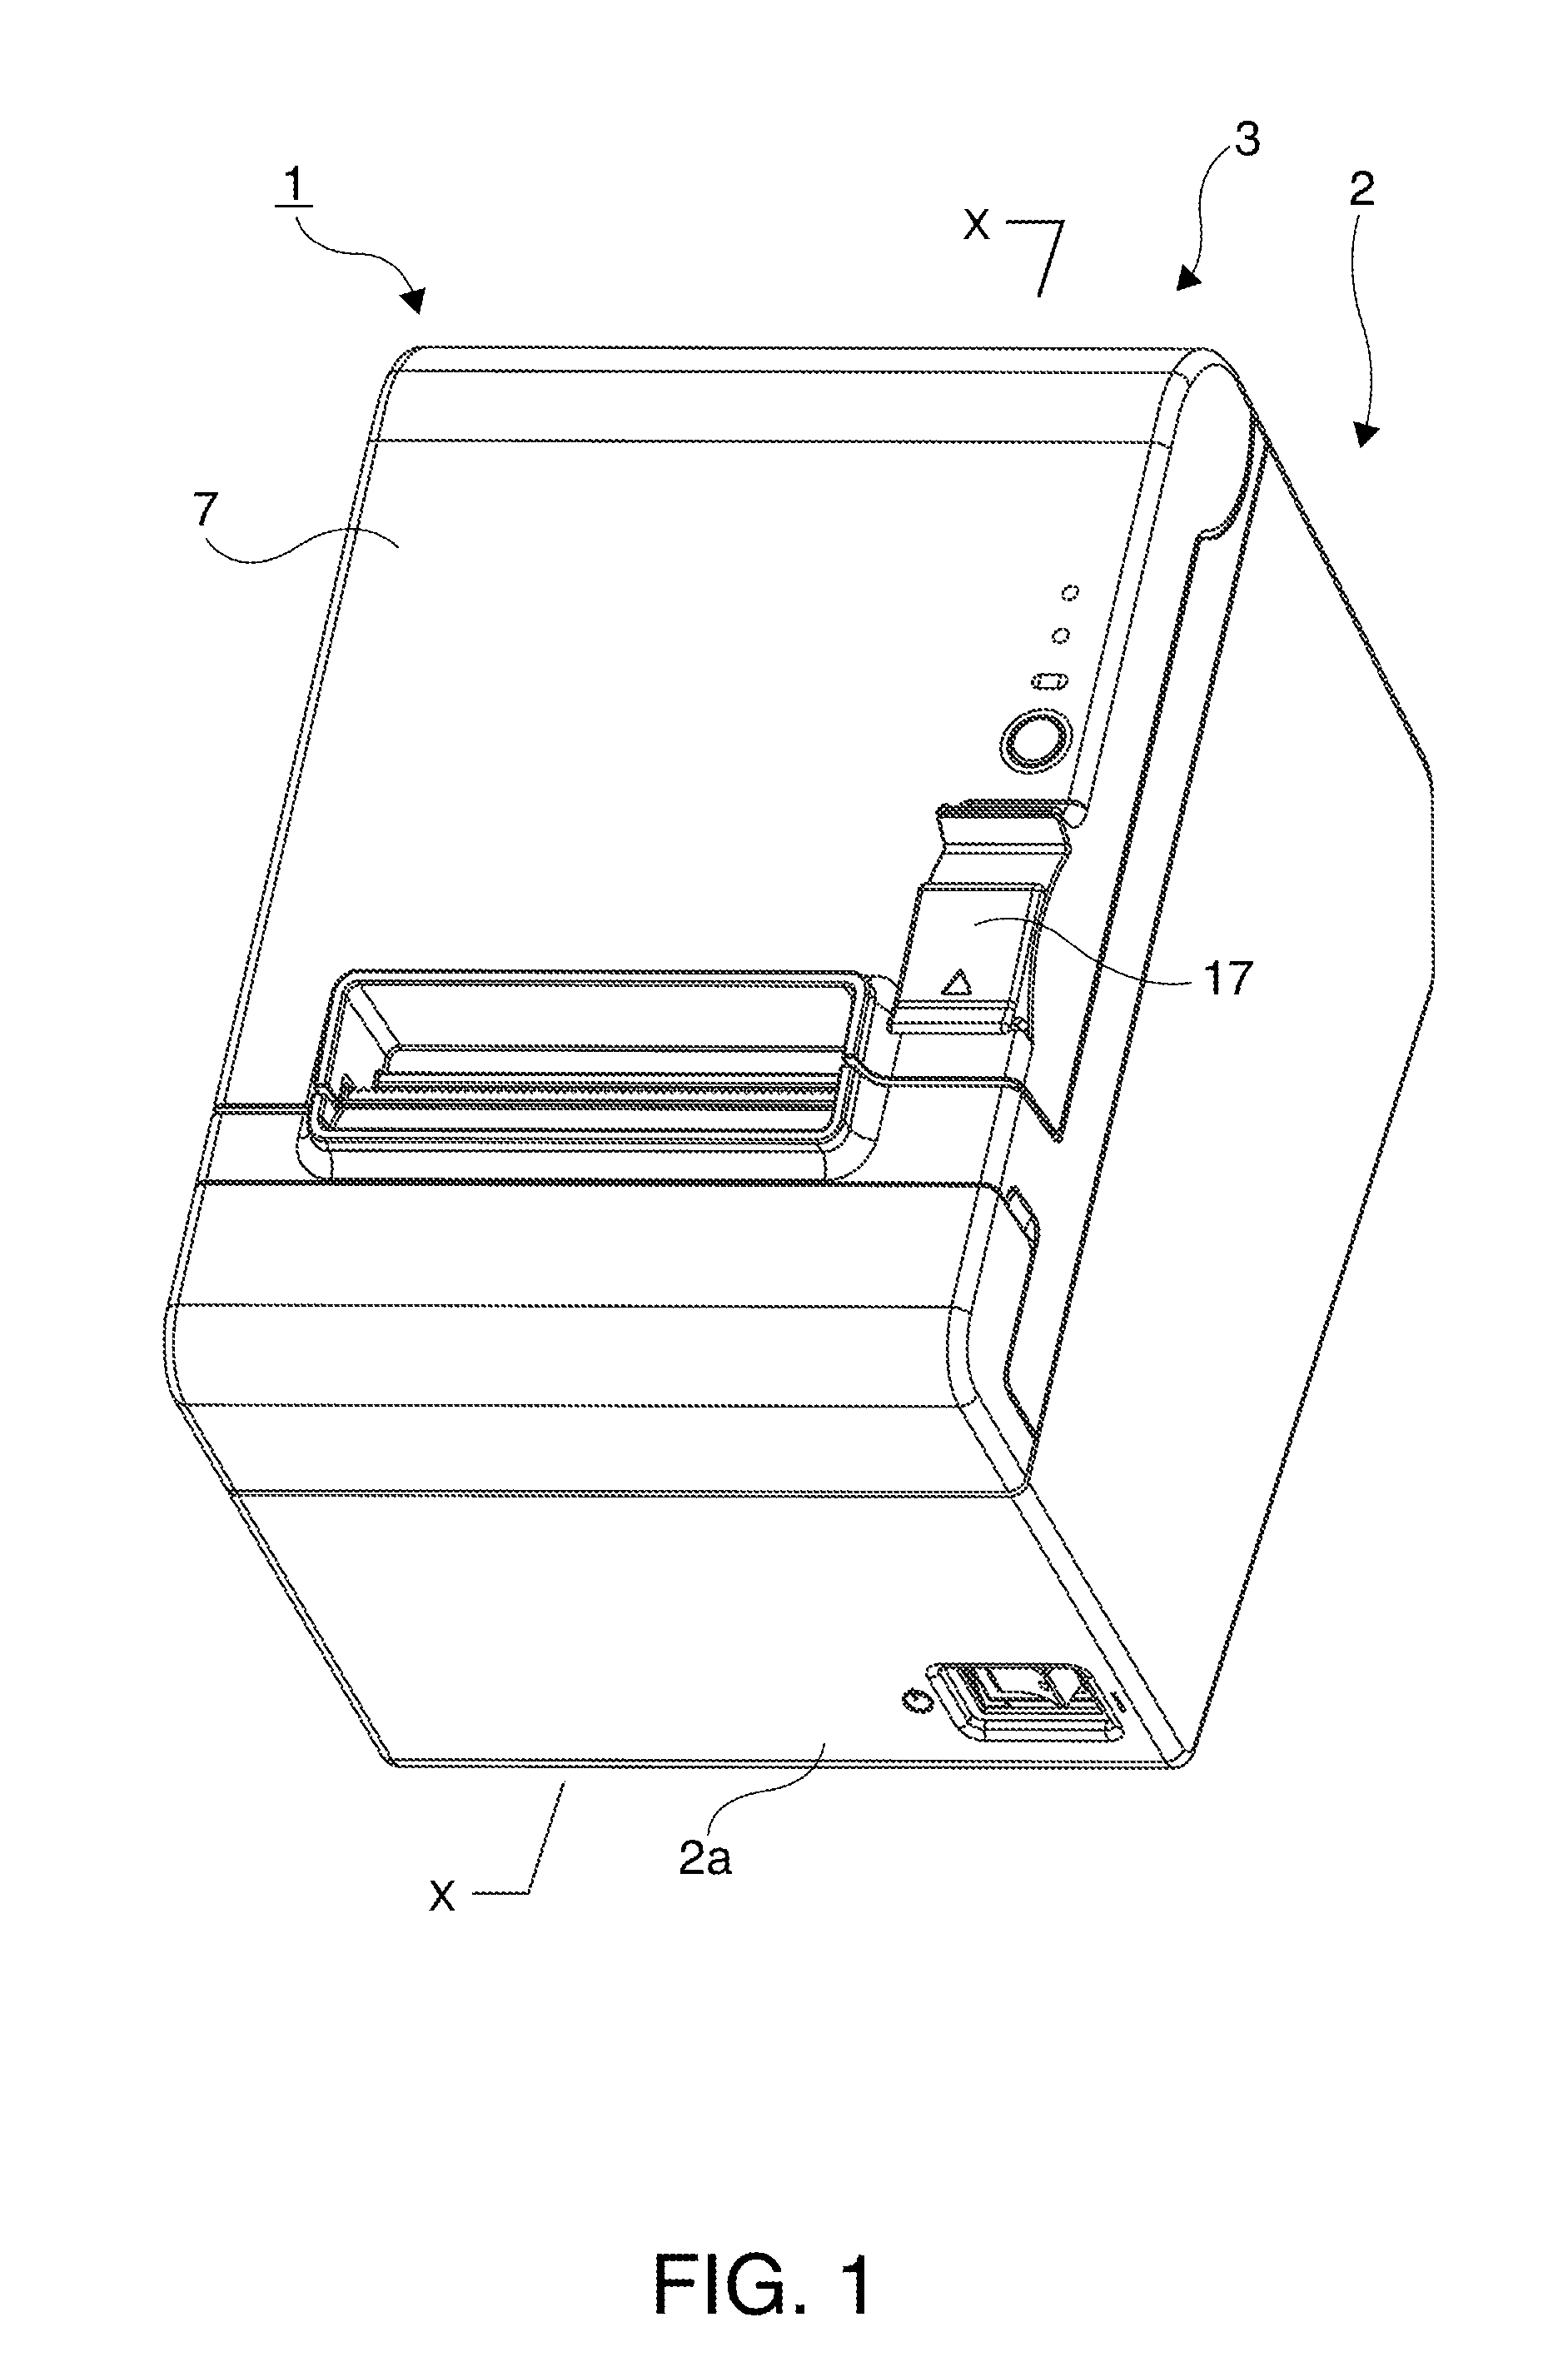 Cover unit and printer